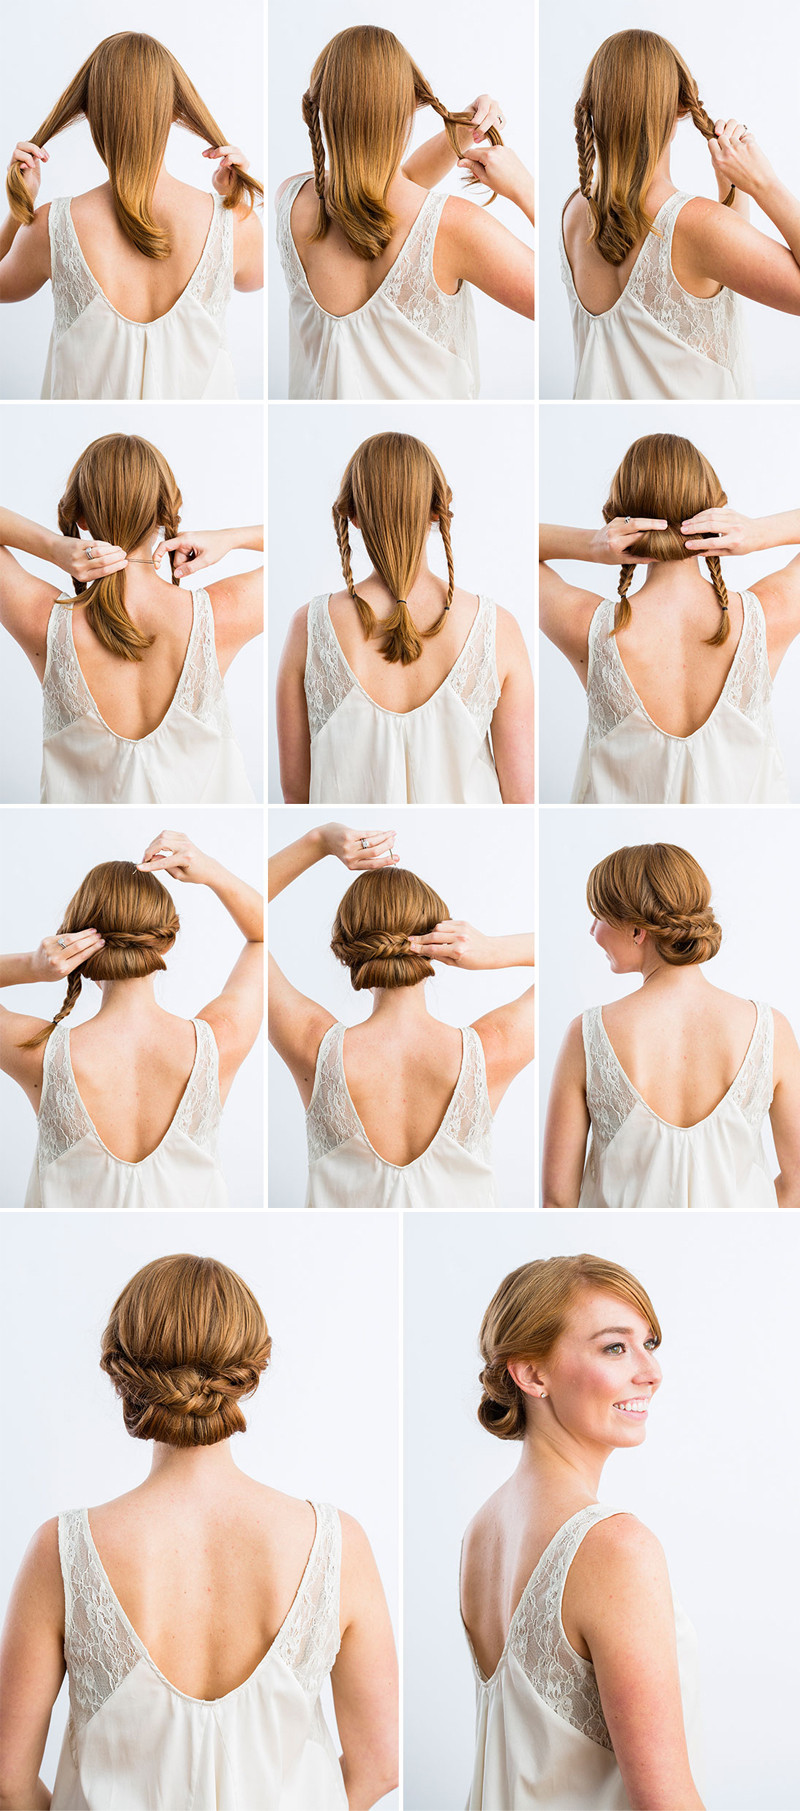 DIY Hairstyle For Long Hair
 10 Best DIY Wedding Hairstyles with Tutorials